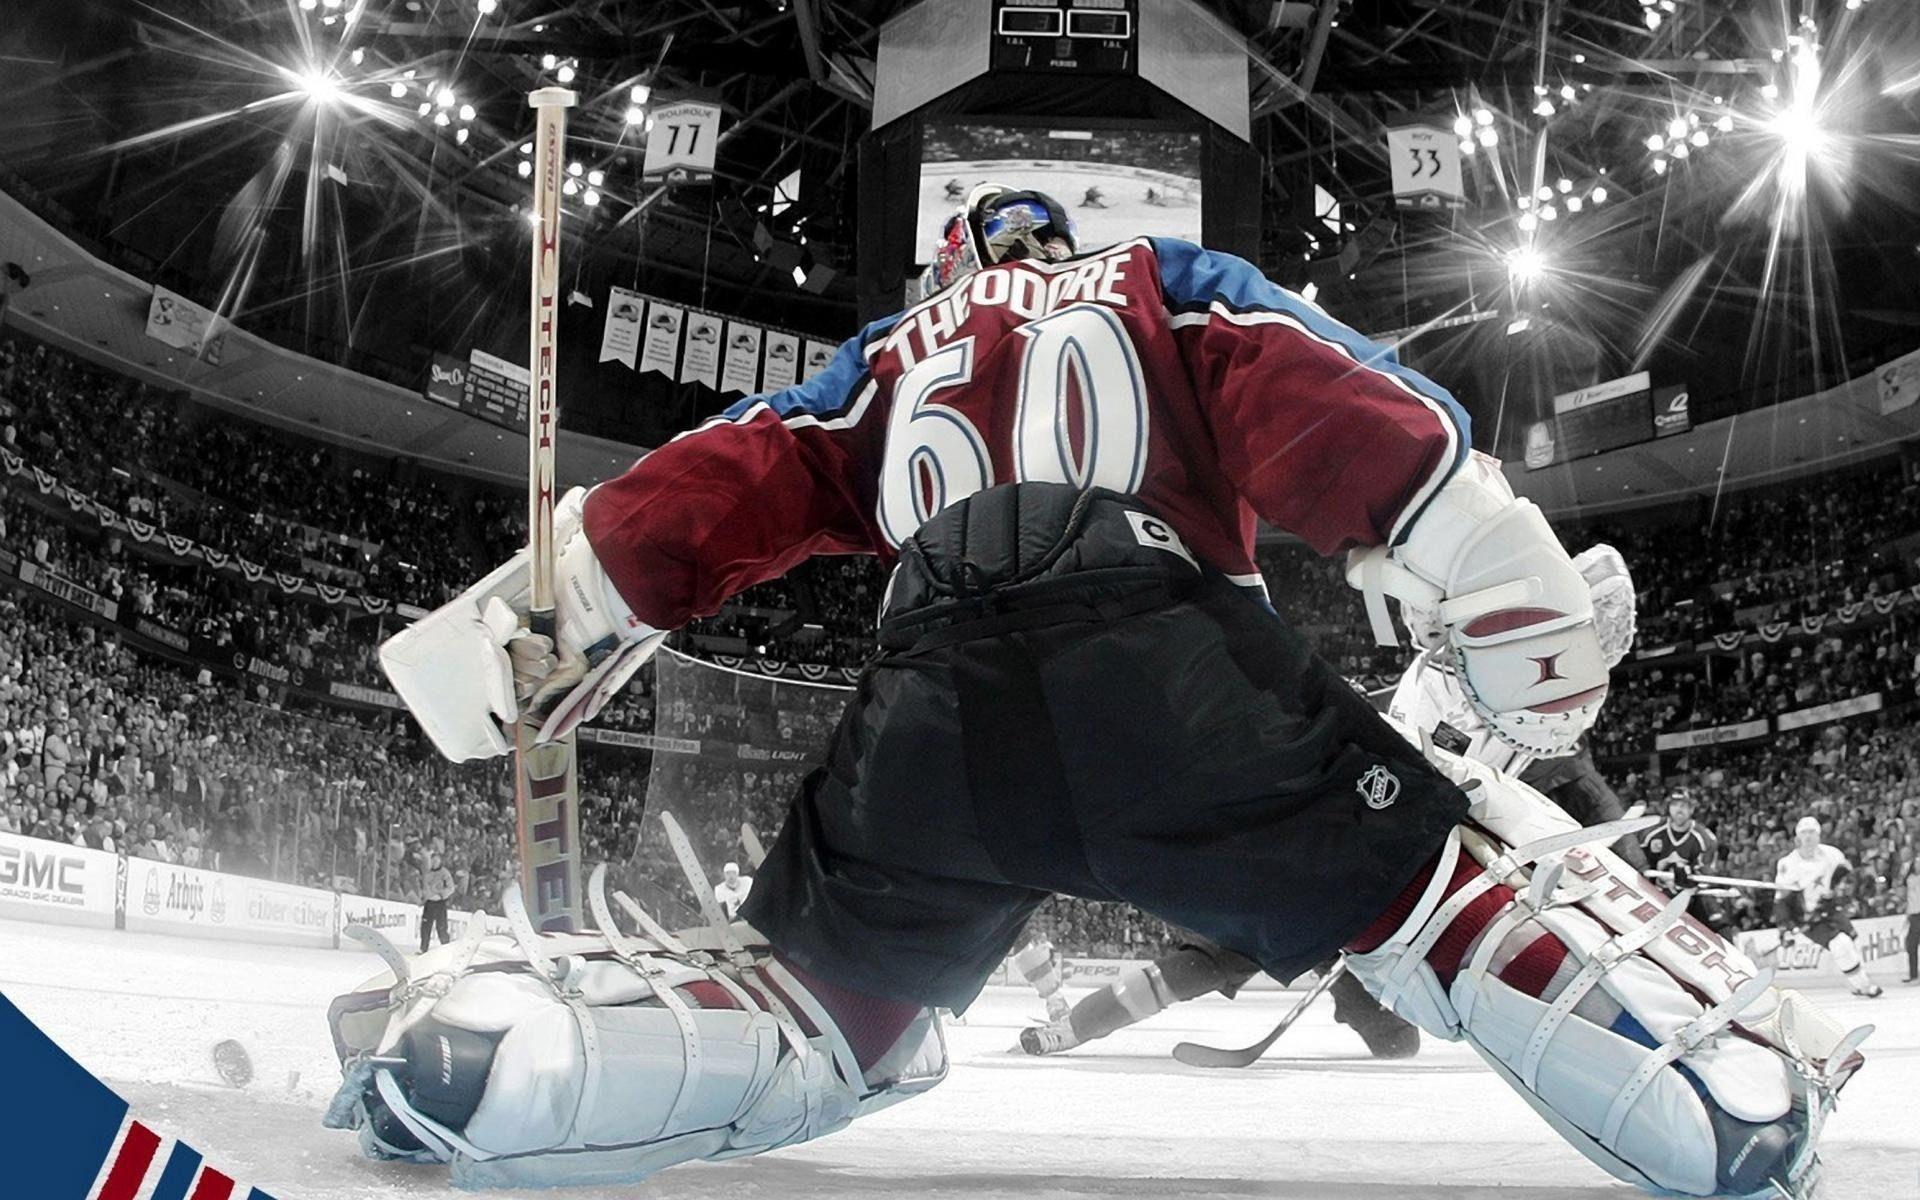 Jose Theodore, NHL wallpaper and image, picture